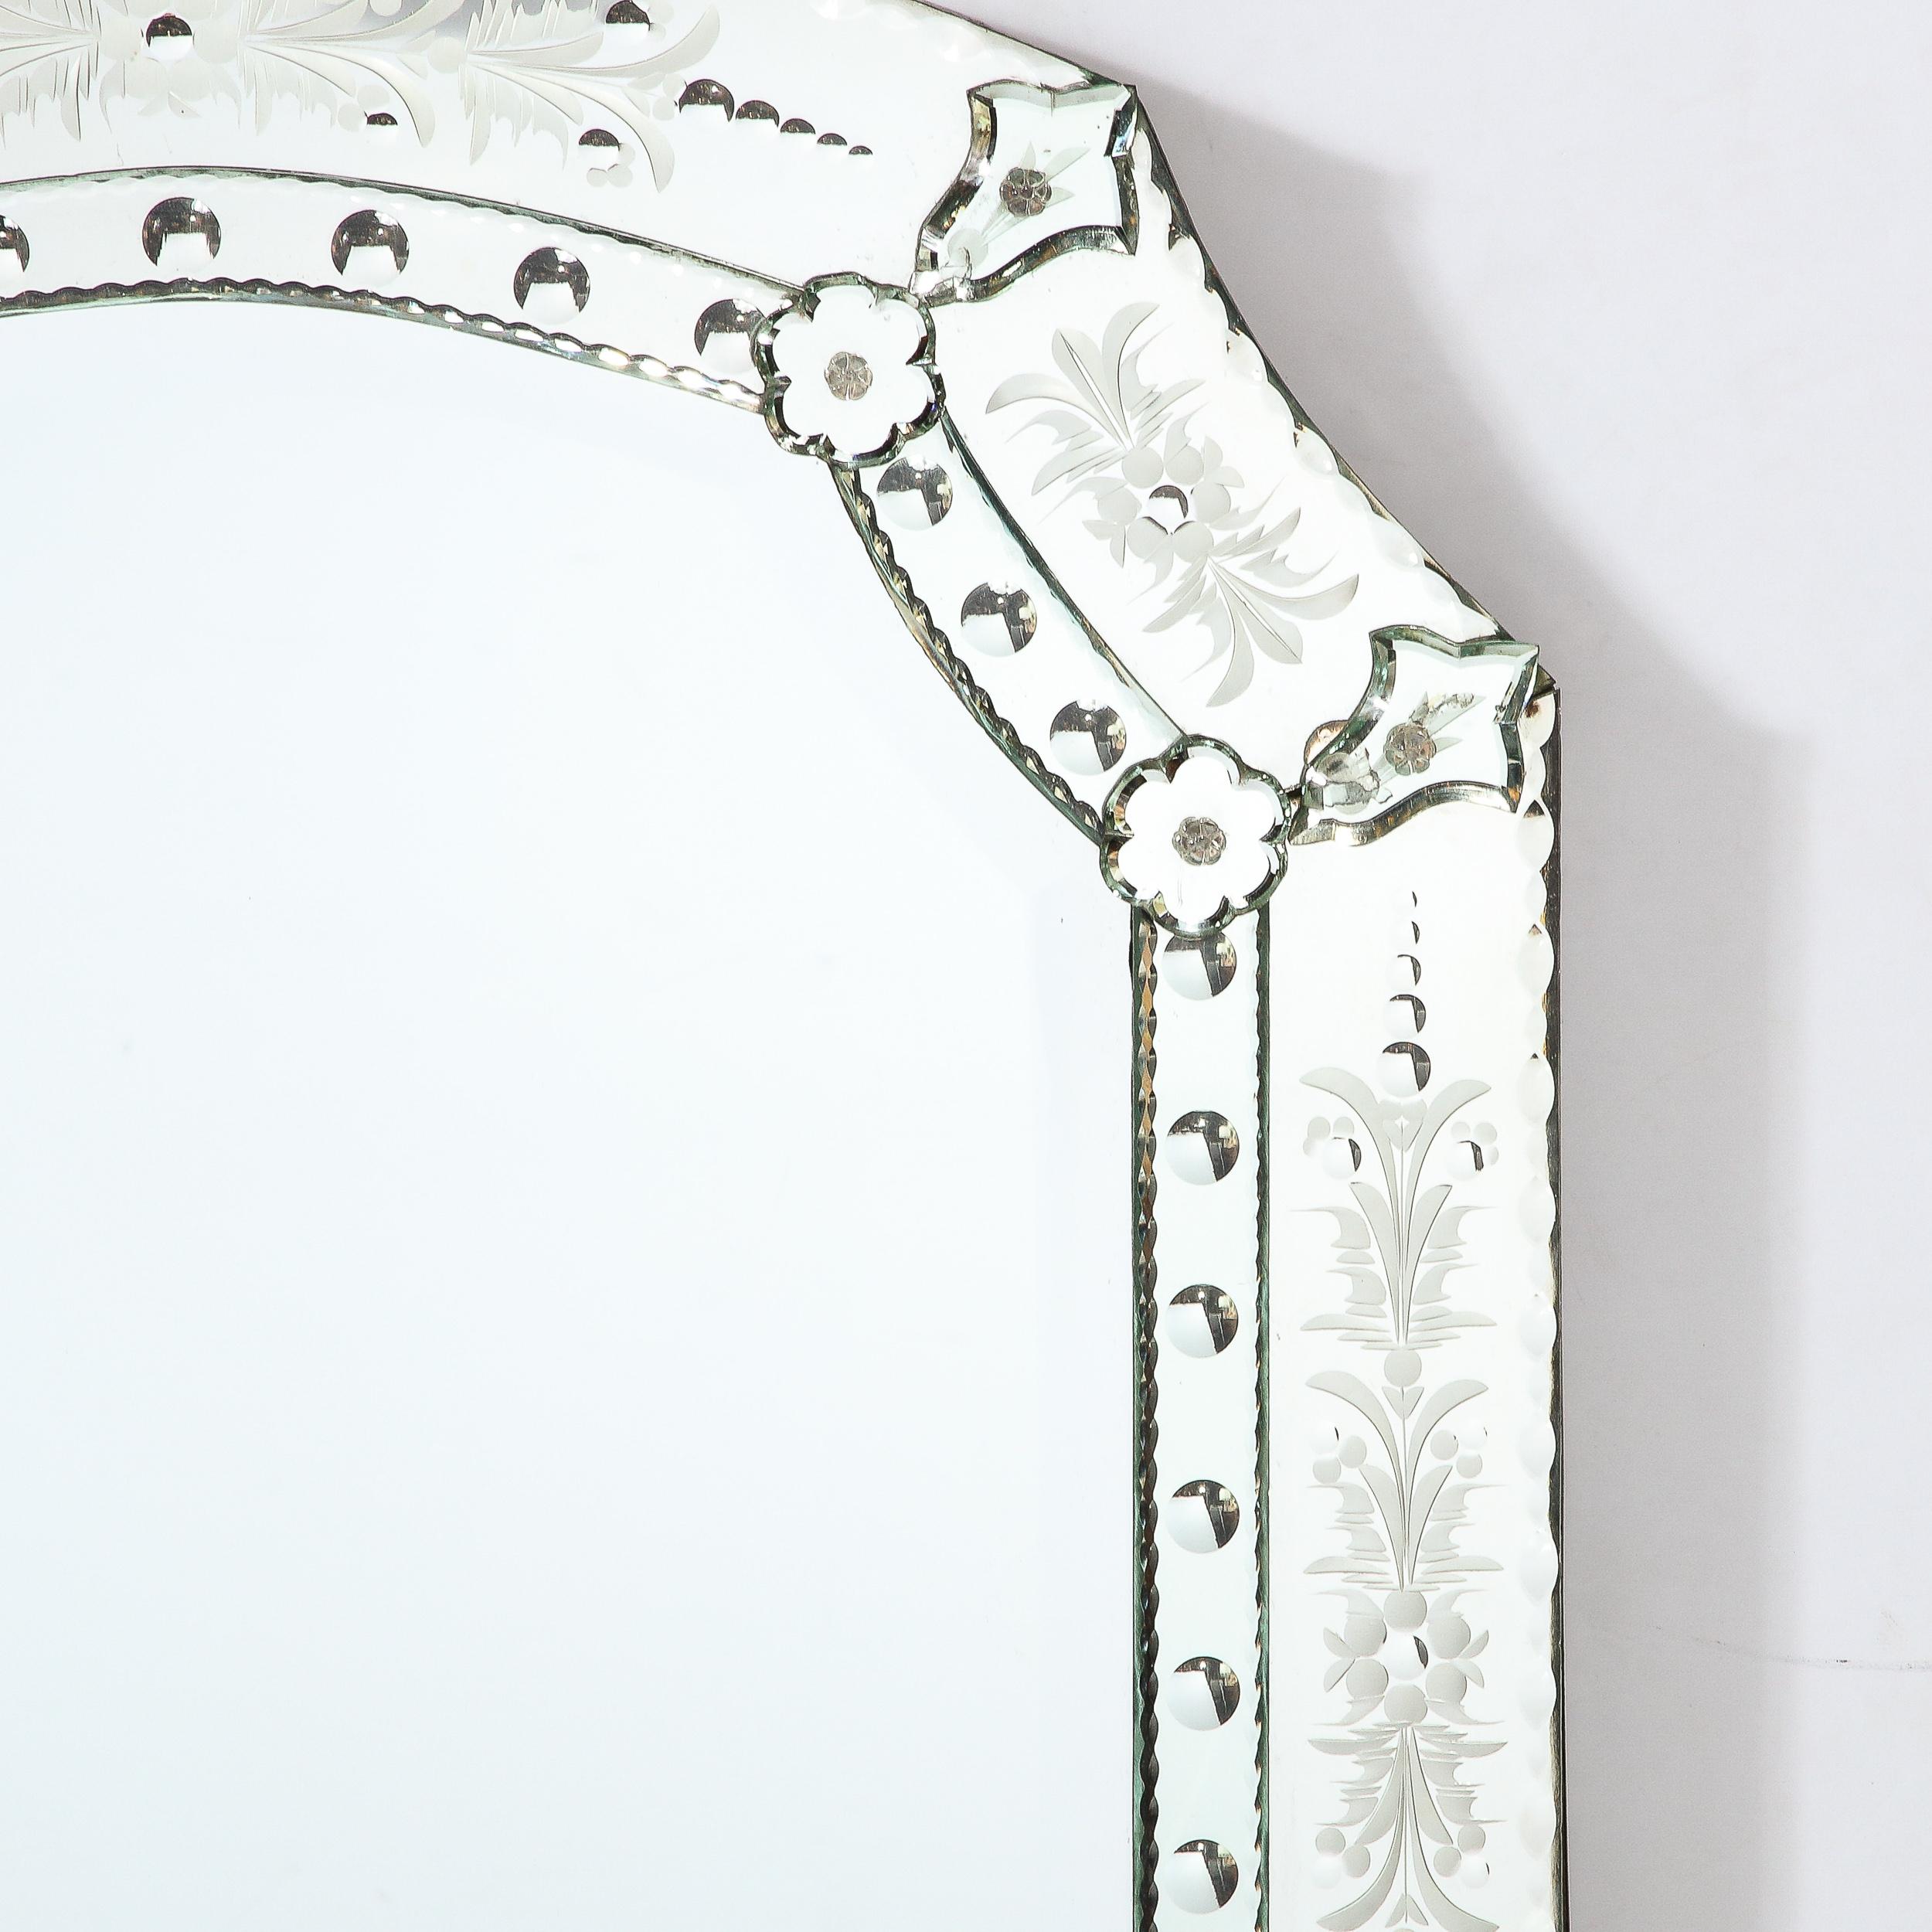 Italian Mid-Century Modern Venetian Glass Mirror W/ Chain Beveling and Reverse Etched